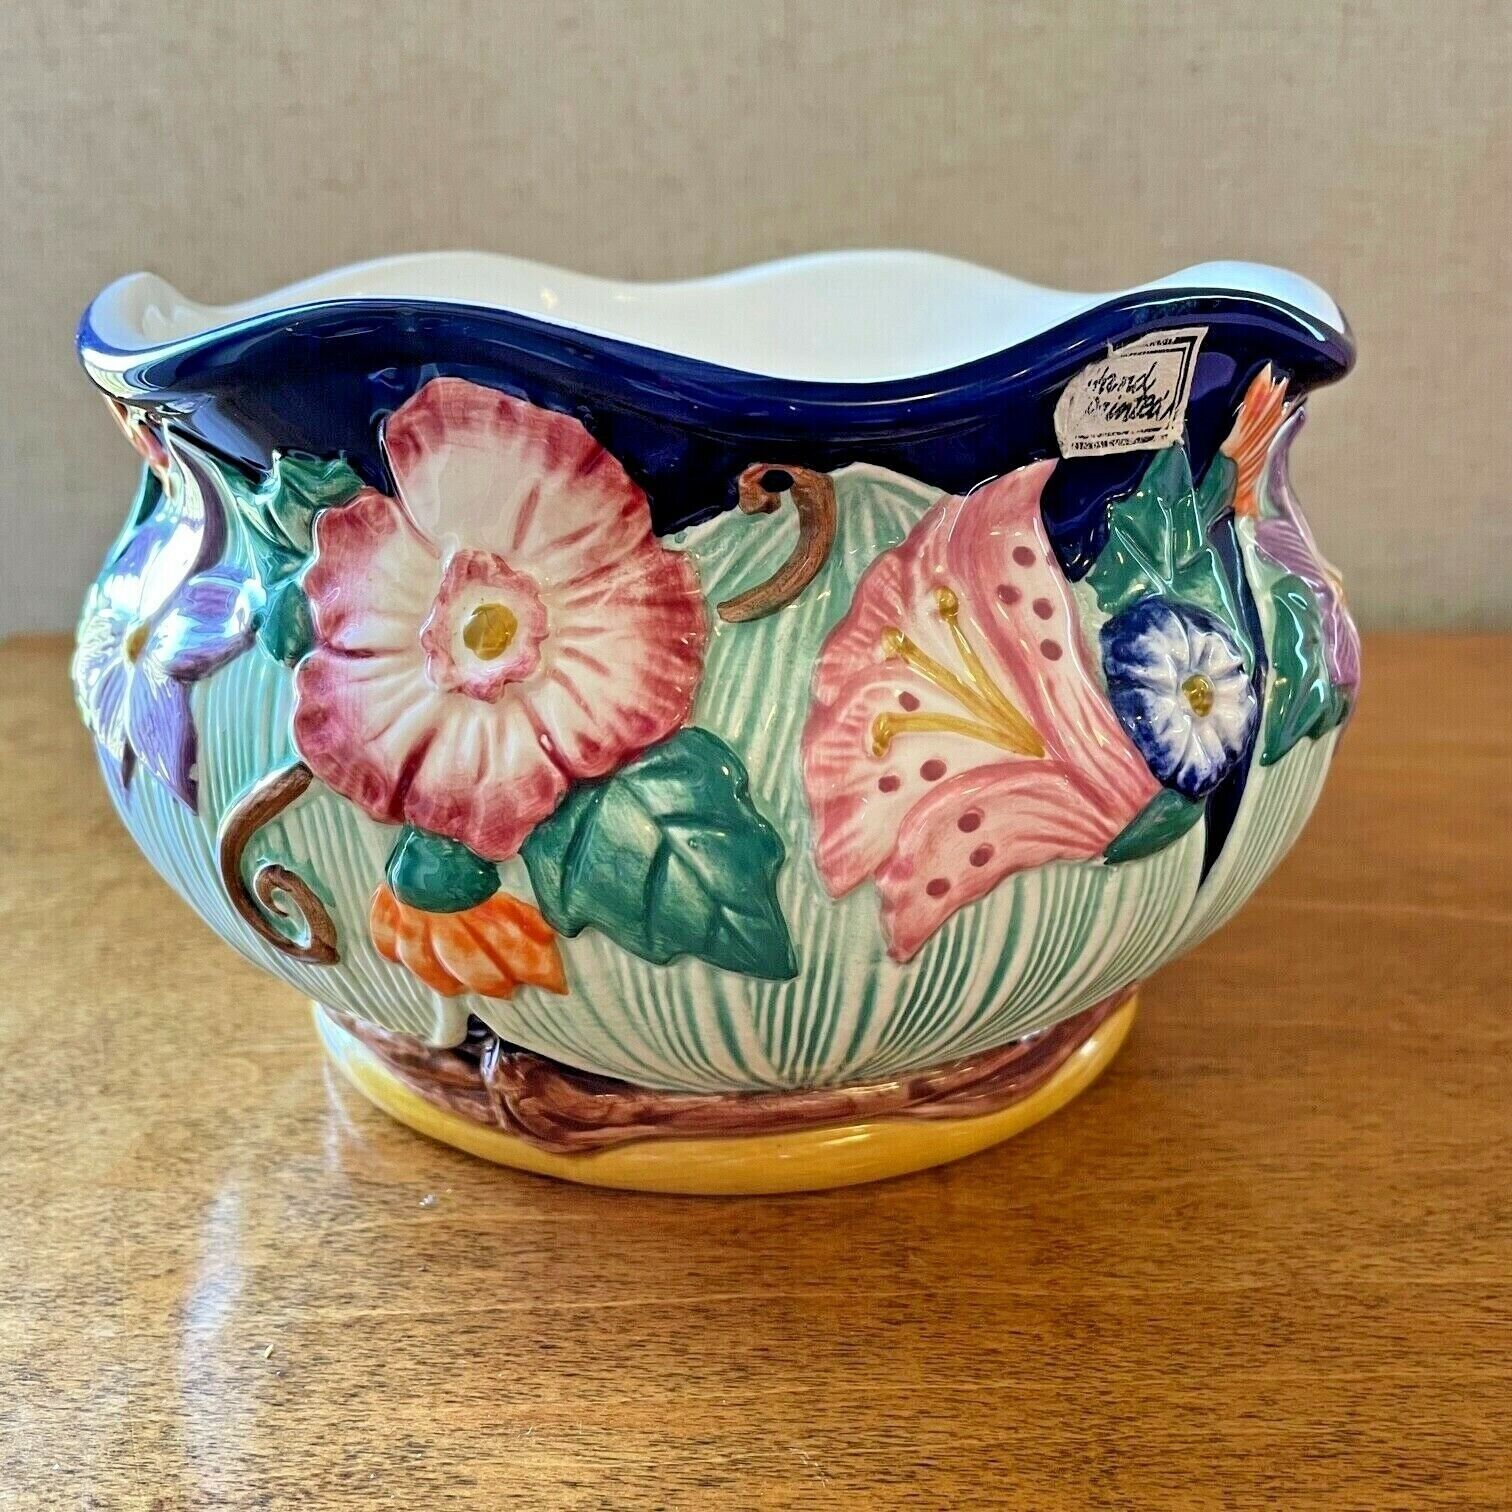 FITZ & FLOYD 1994 Hand Painted Planter Bowl Raised Colorful Floral Pattern